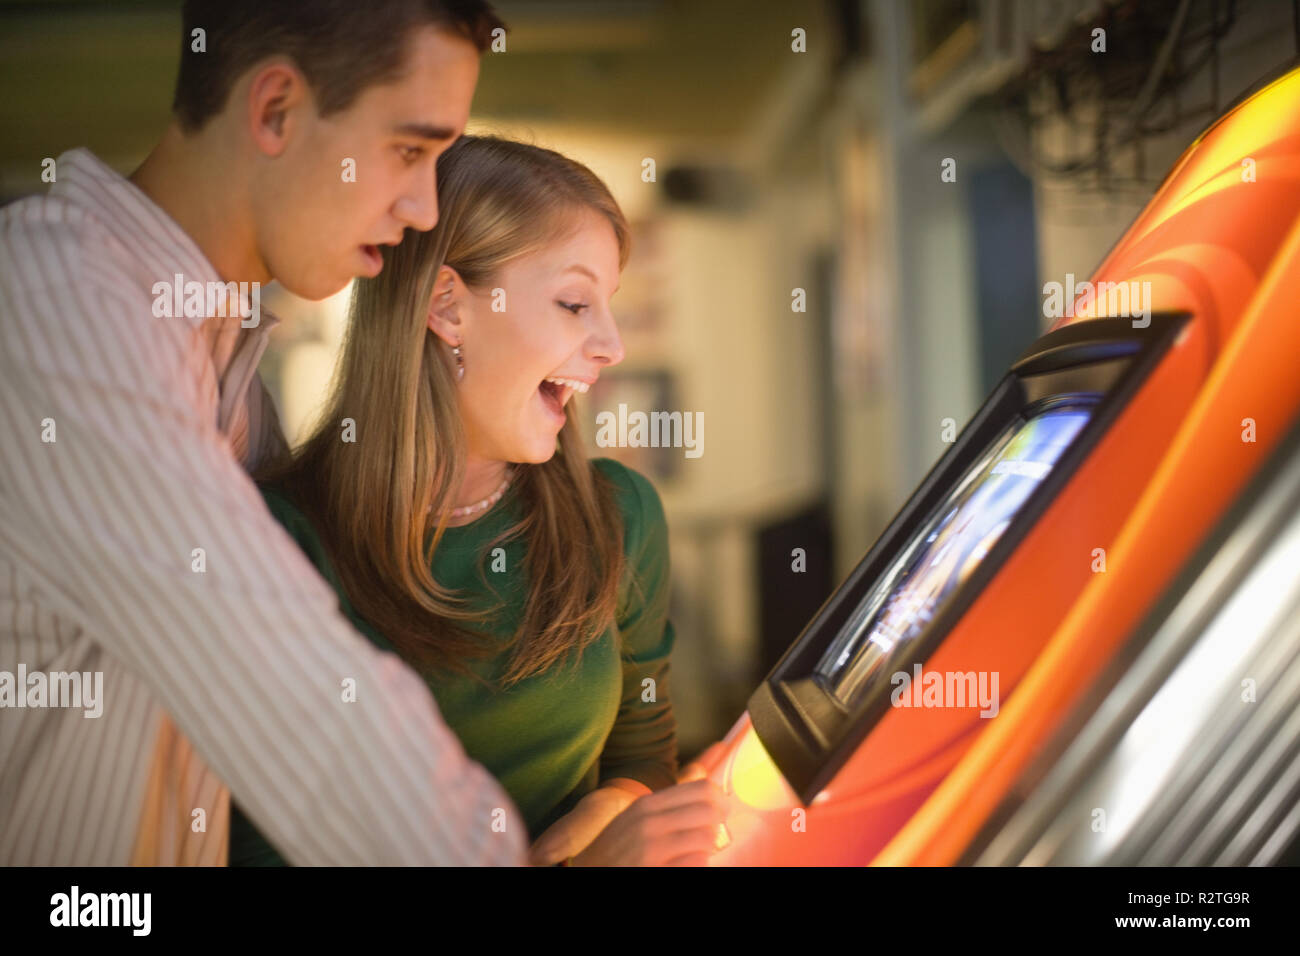 Young couple playing an arcade game. Stock Photo